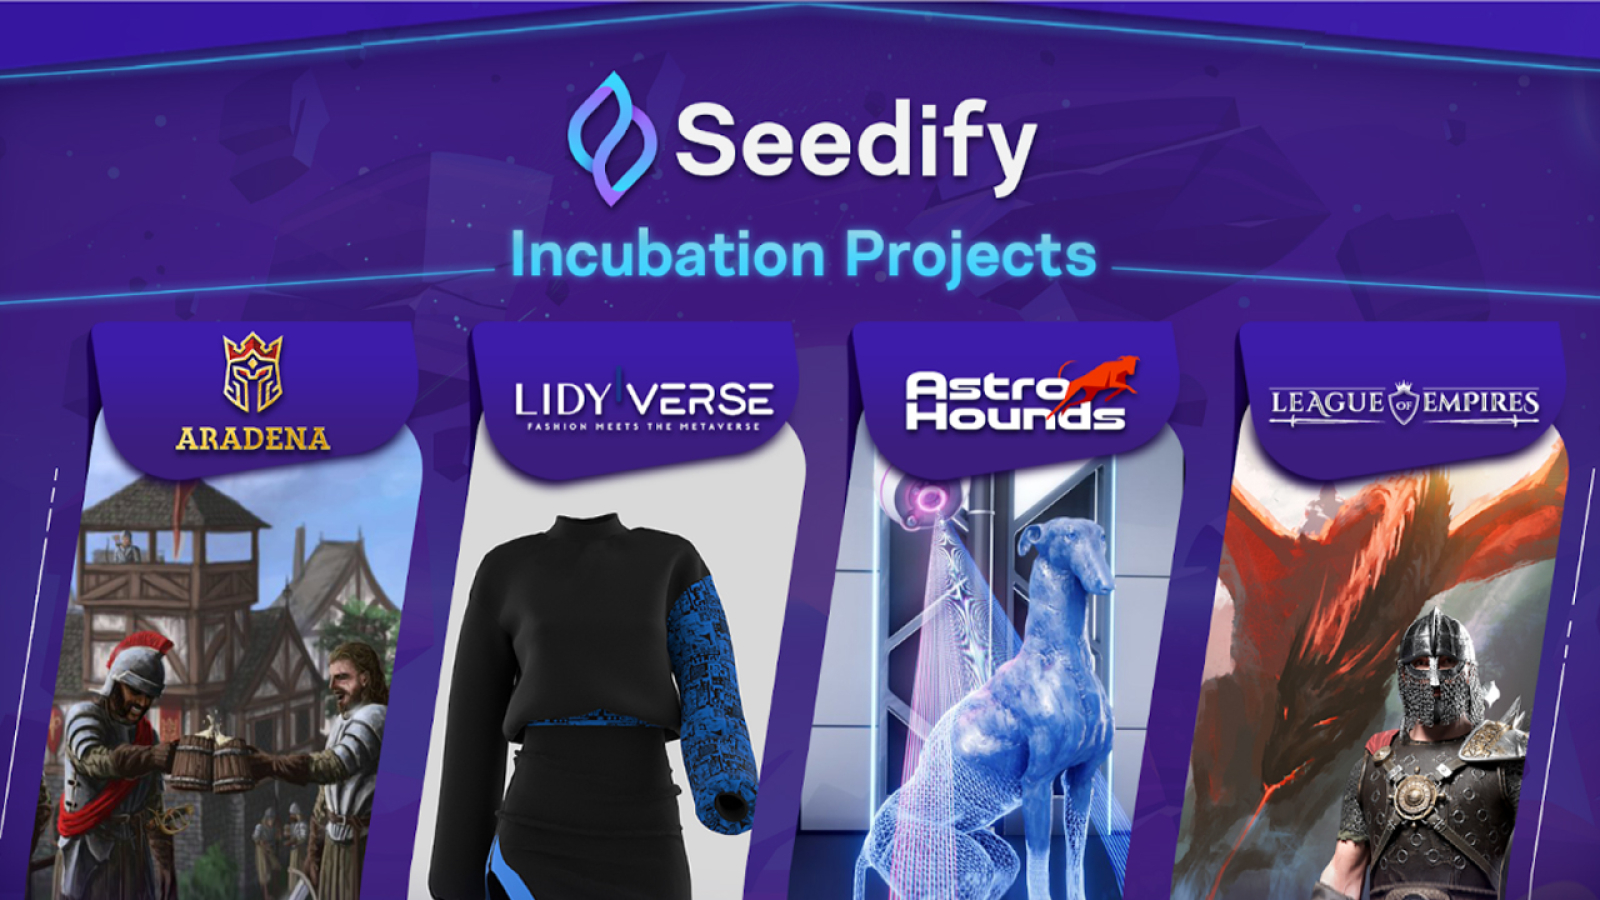 Seedify Reveals Its New Incubation Projects